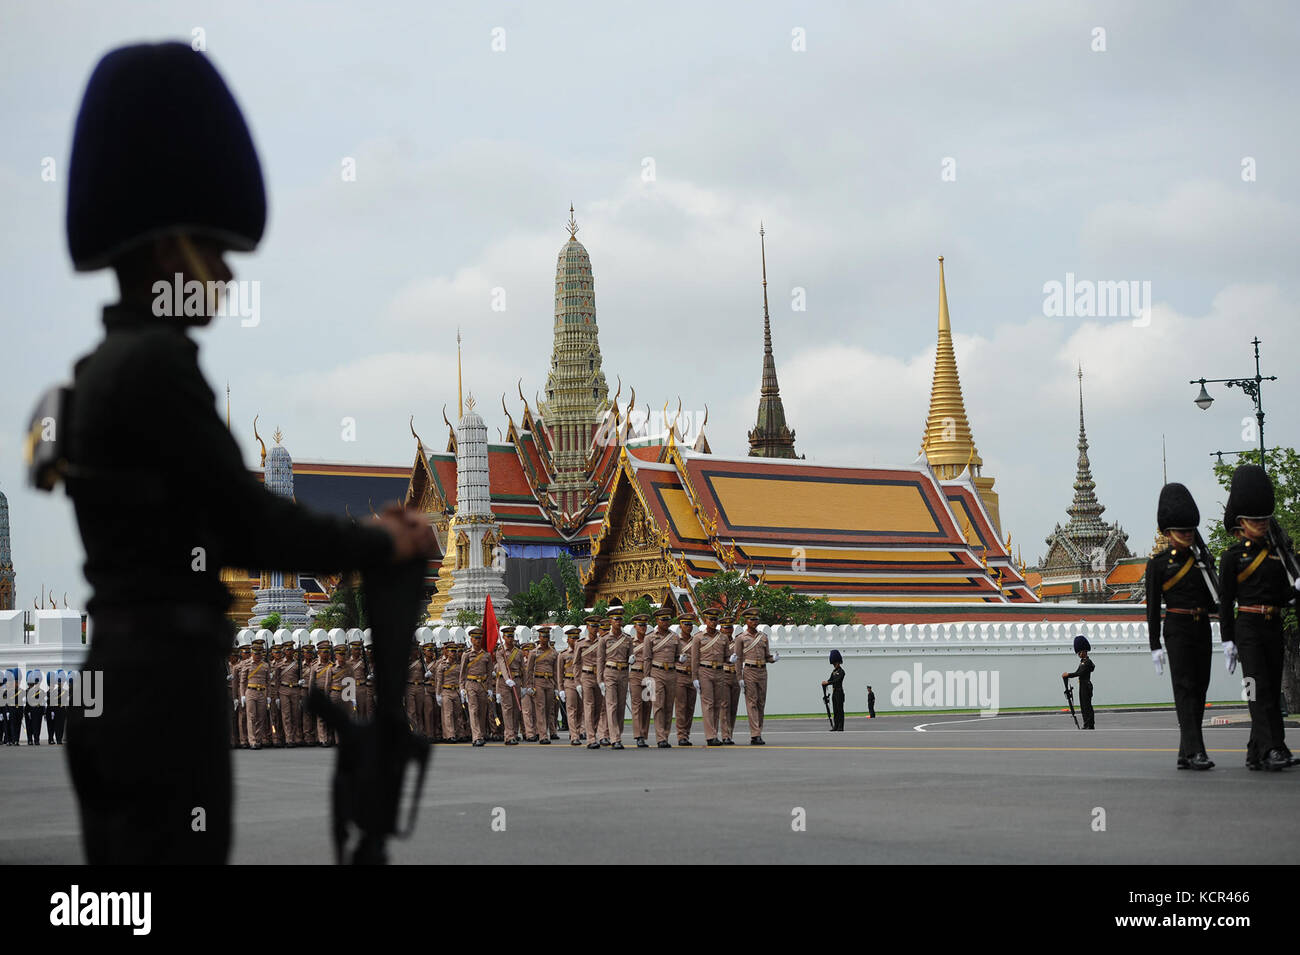 Bangkok, Oct. 7. 29th Oct, 2017. Soldiers and honour guards walk in a procession during a rehearsal for the funeral of the late Thai King Bhumibol Adulyadej near the Grand Palace in Bangkok, Thailand, Oct. 7, 2017. The royal funeral of King Bhumibol is scheduled between Oct. 25 and Oct. 29, 2017. Credit: Rachen Sageamsak/Xinhua/Alamy Live News Stock Photo